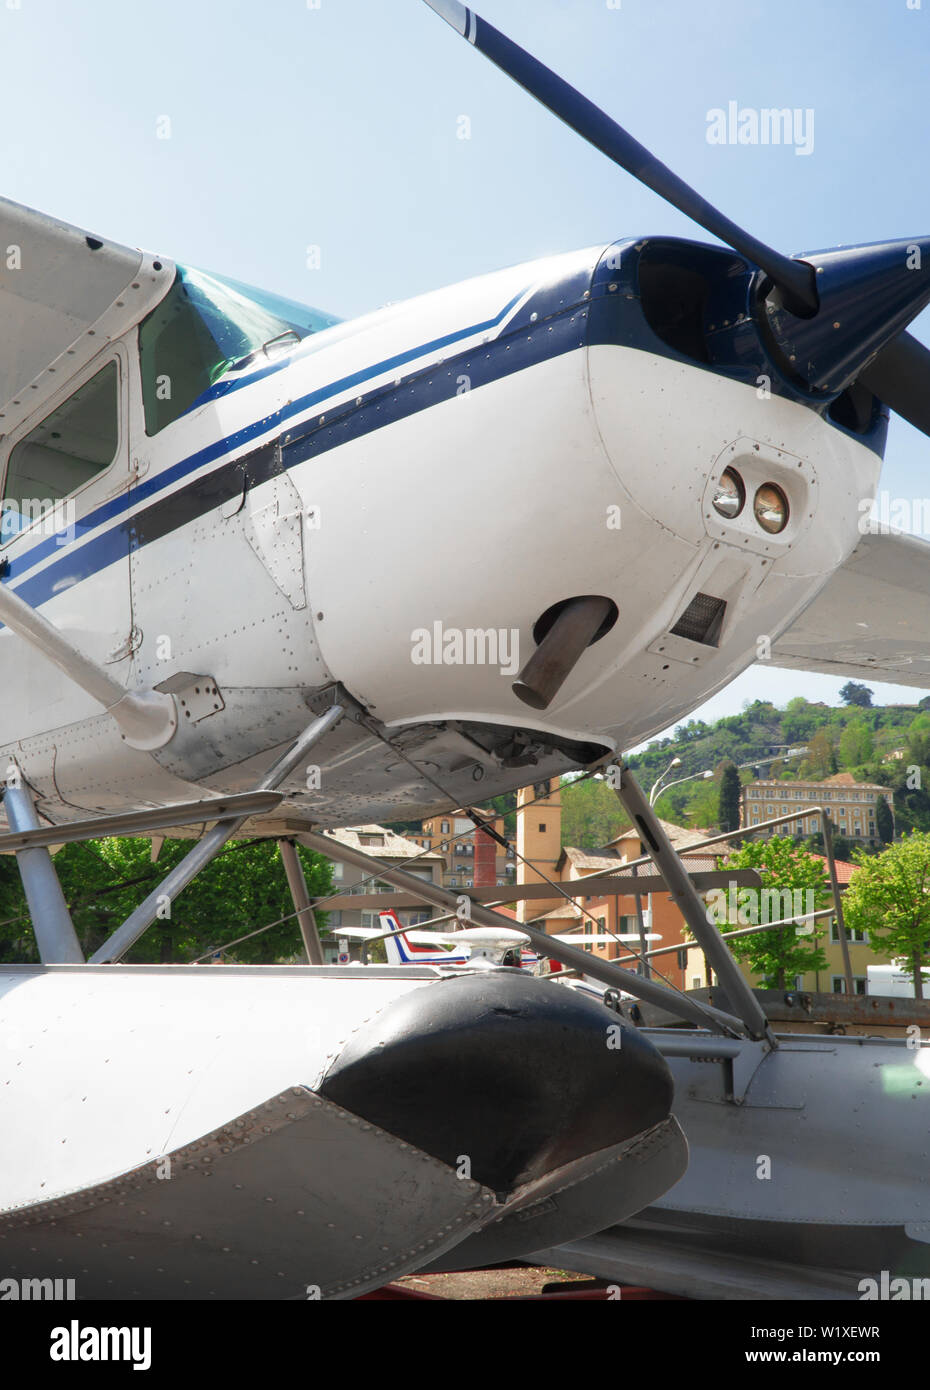 Close-up view of floatplane or seaplane standing. Stock Photo